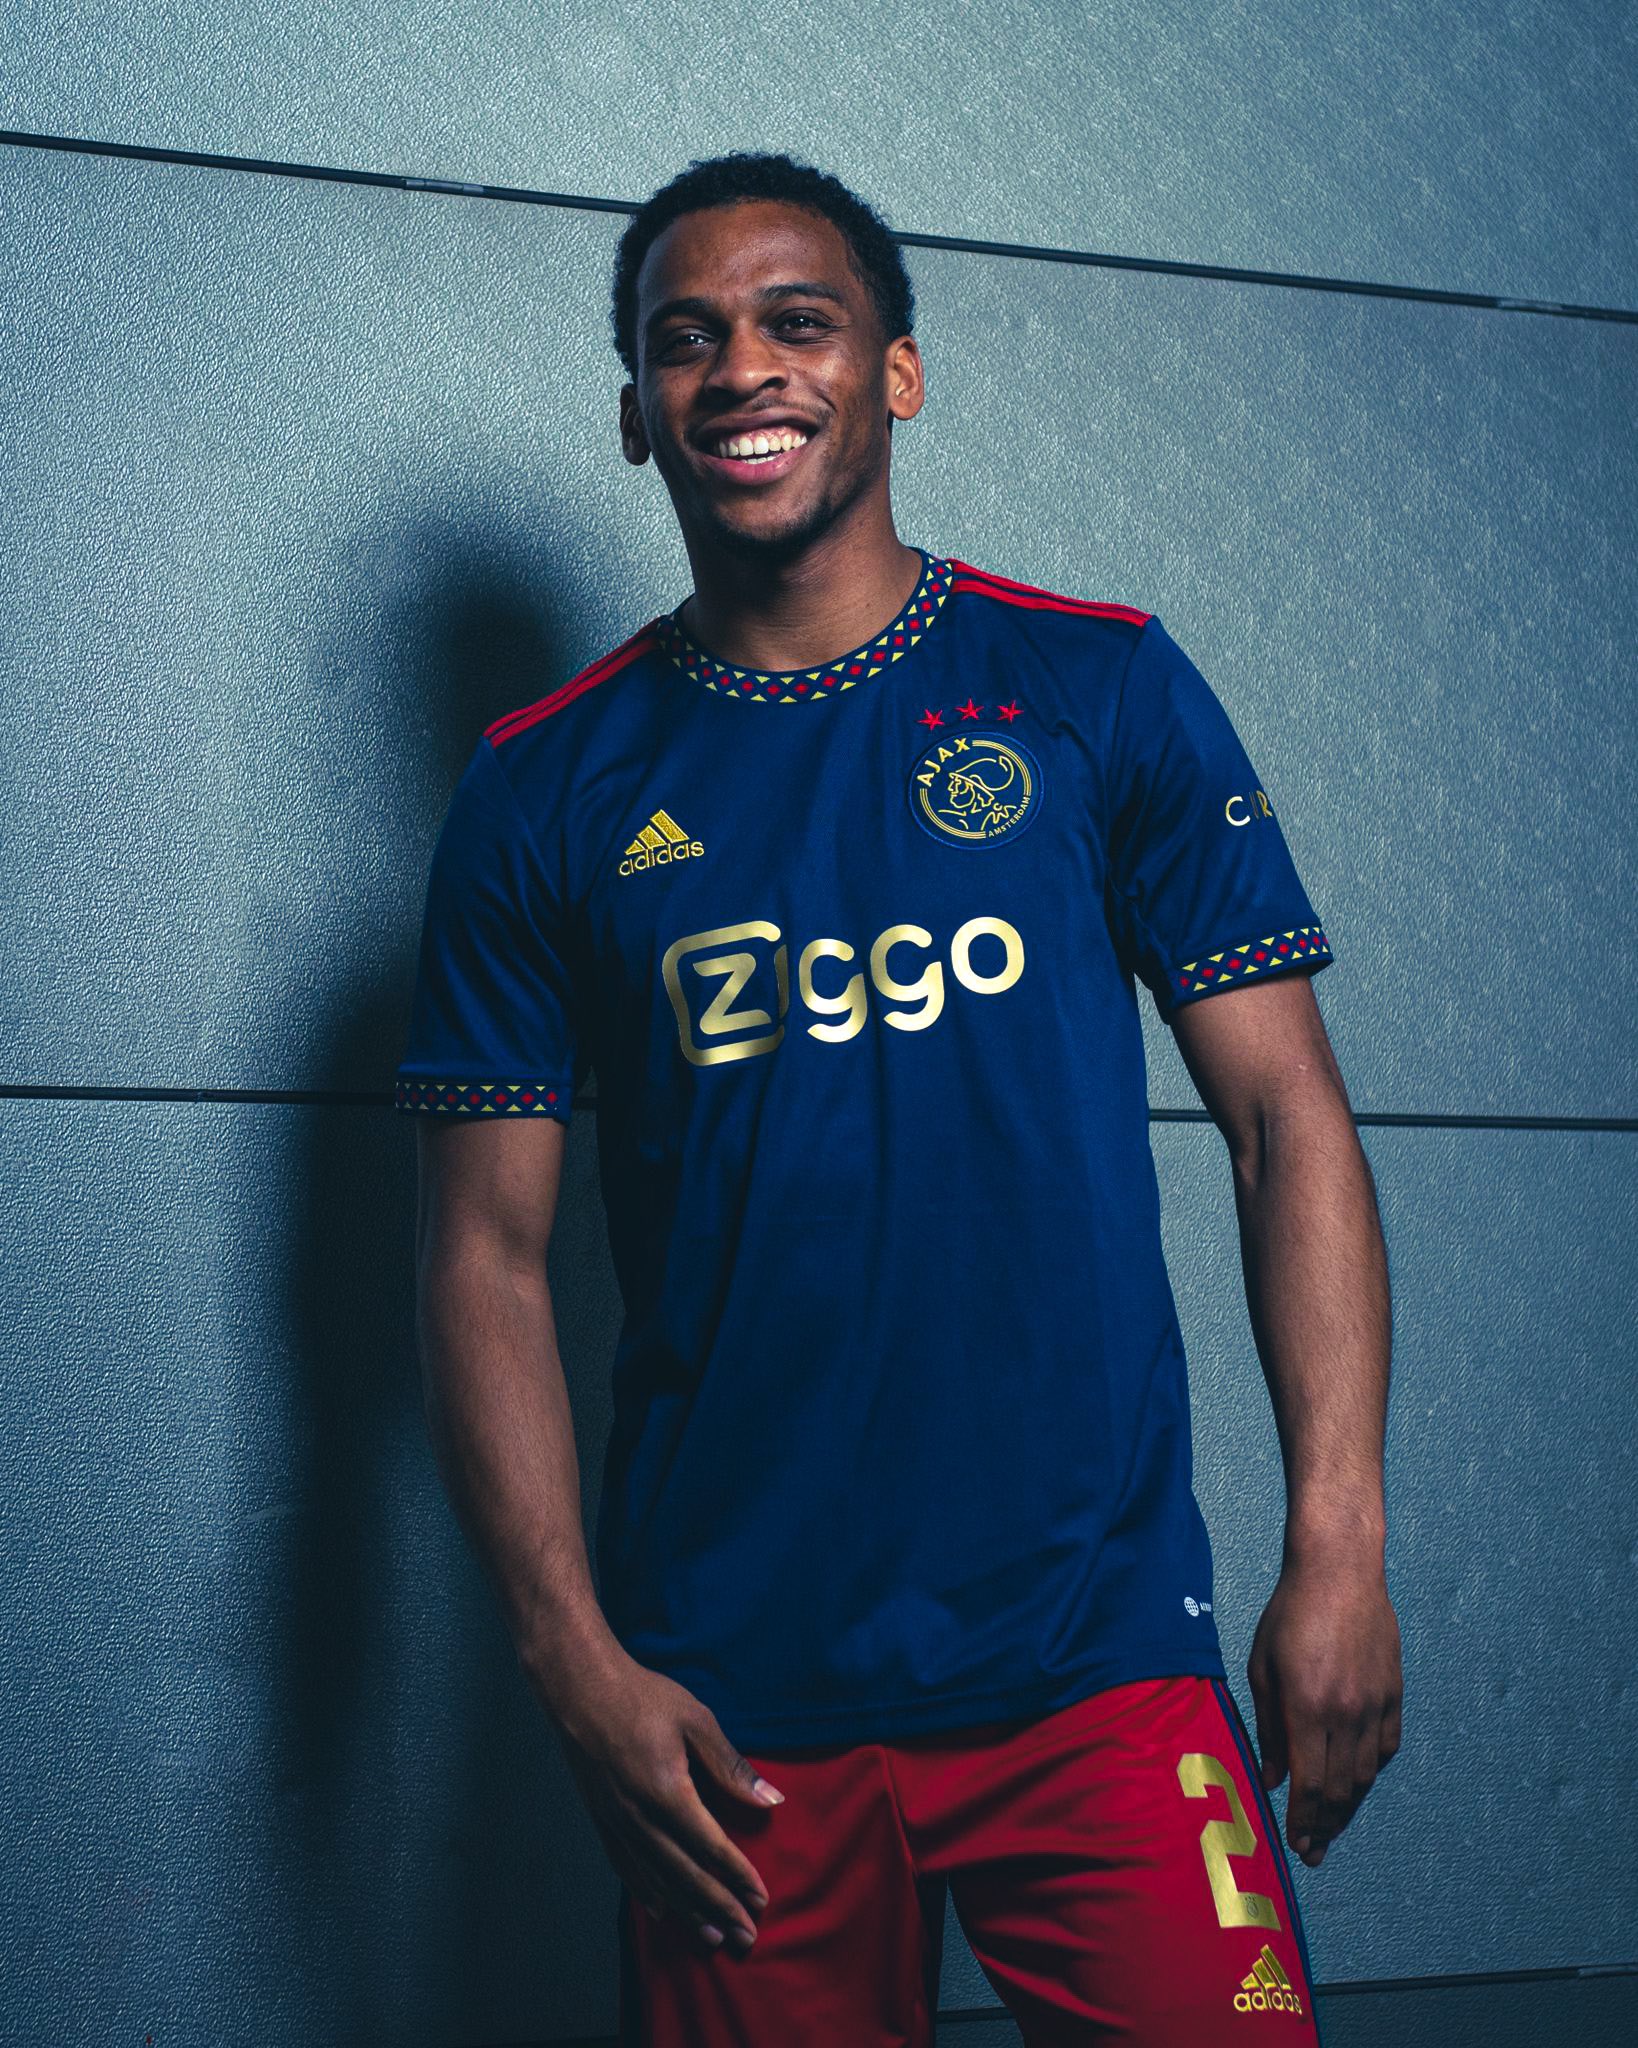 adidas Football on Twitter: "The new @AFCAjax / @AjaxVrouwen 22/23 Away Kit  is here 💙✨ What do you think? 👇" / Twitter